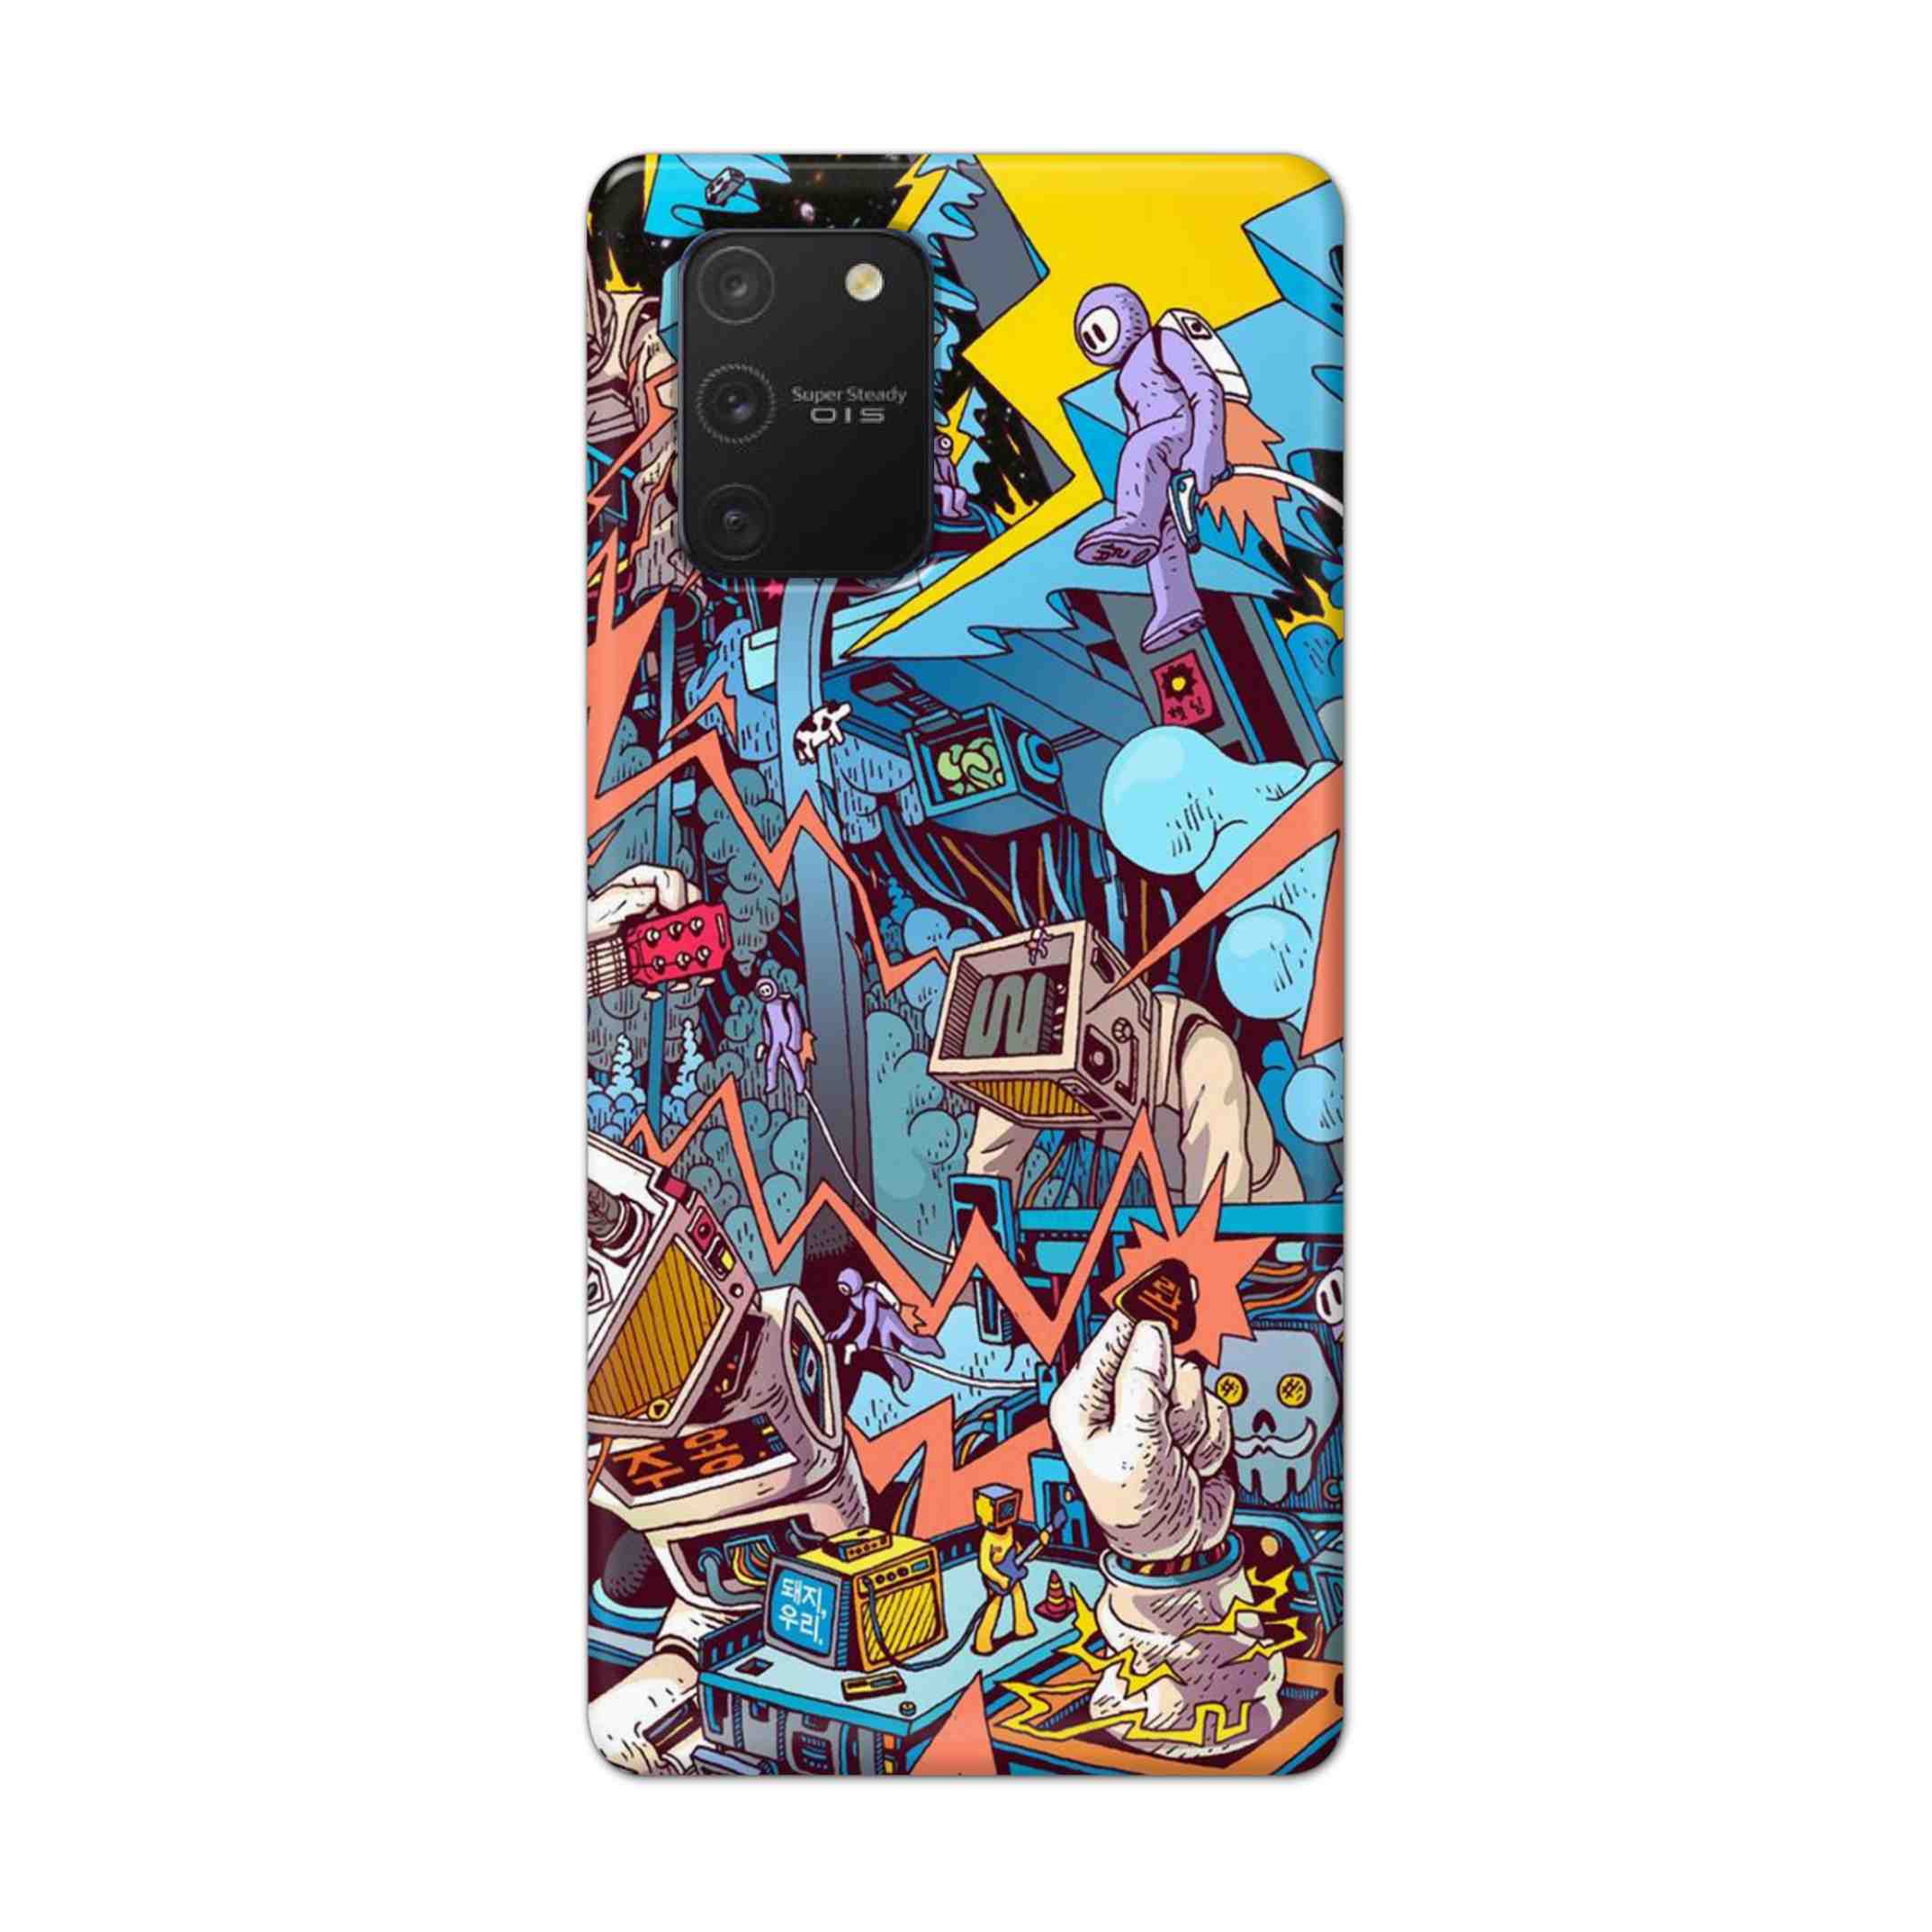 Buy Ofo Panic Hard Back Mobile Phone Case Cover For Samsung Galaxy S10 Lite Online